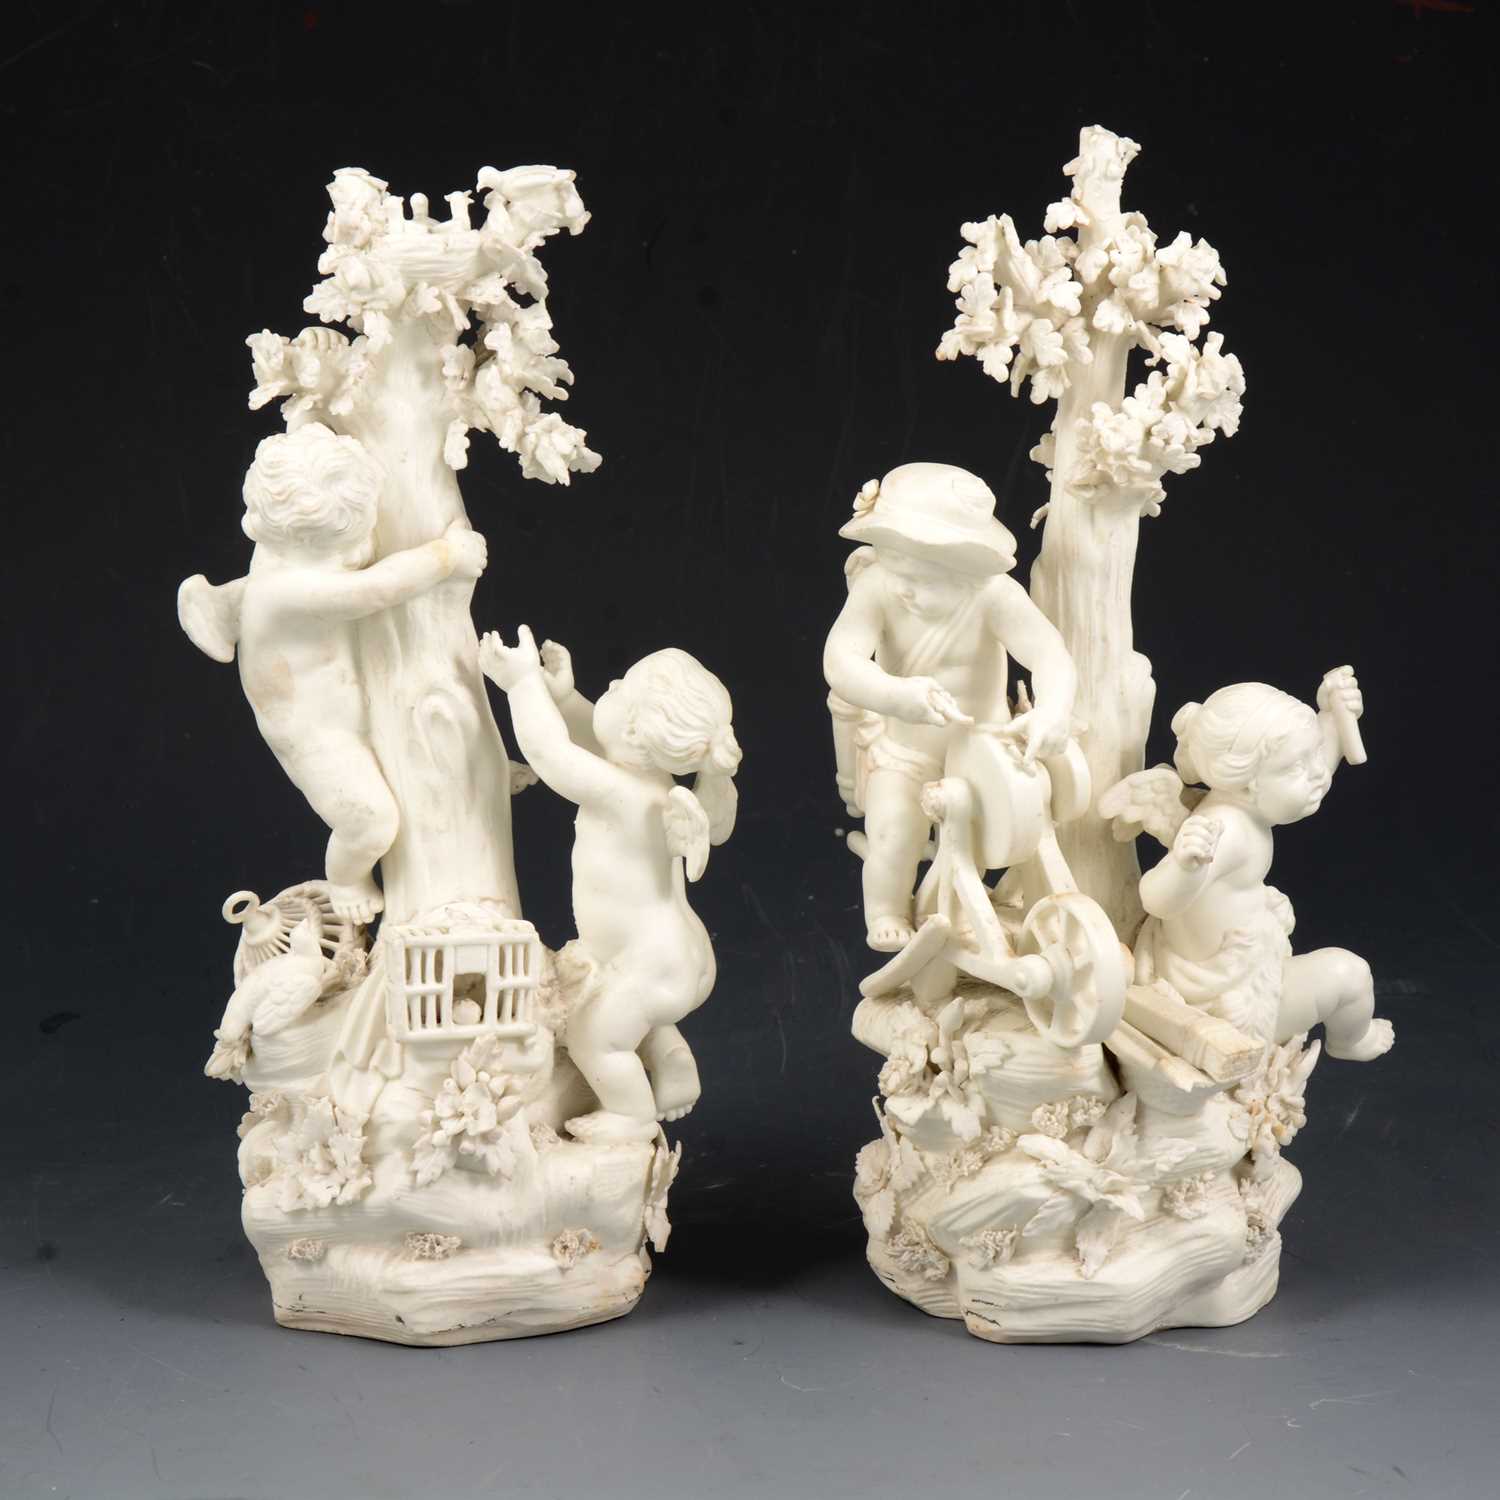 Lot 9 - Two  Derby biscuit porcelain groups, Air and Fire from the Four Elements